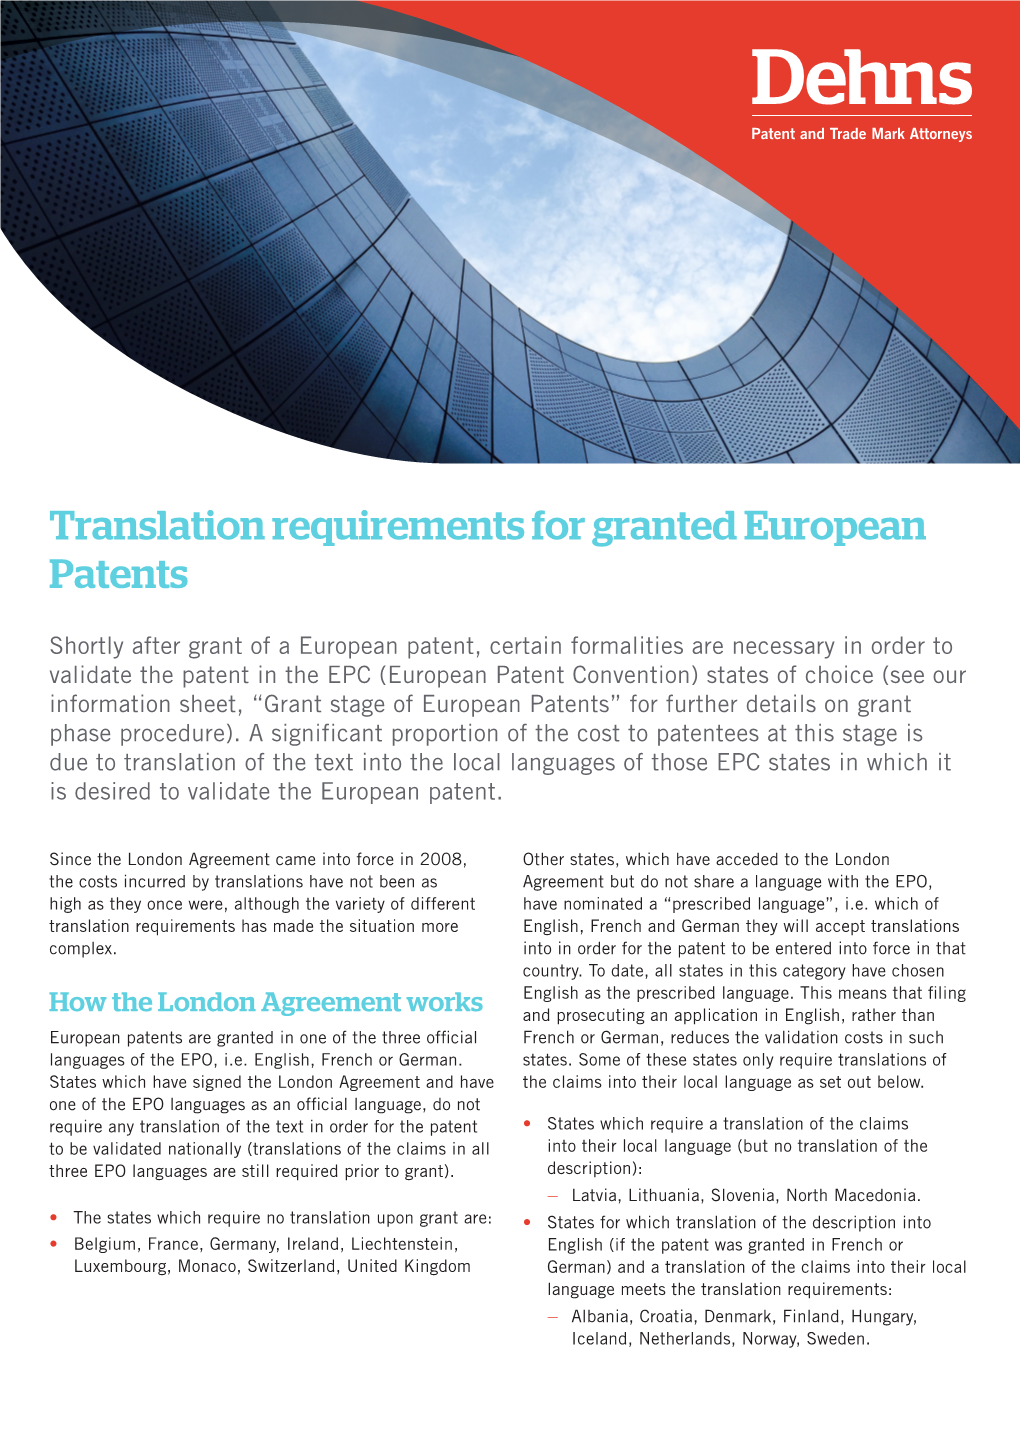 Translation Requirements for Granted European Patents